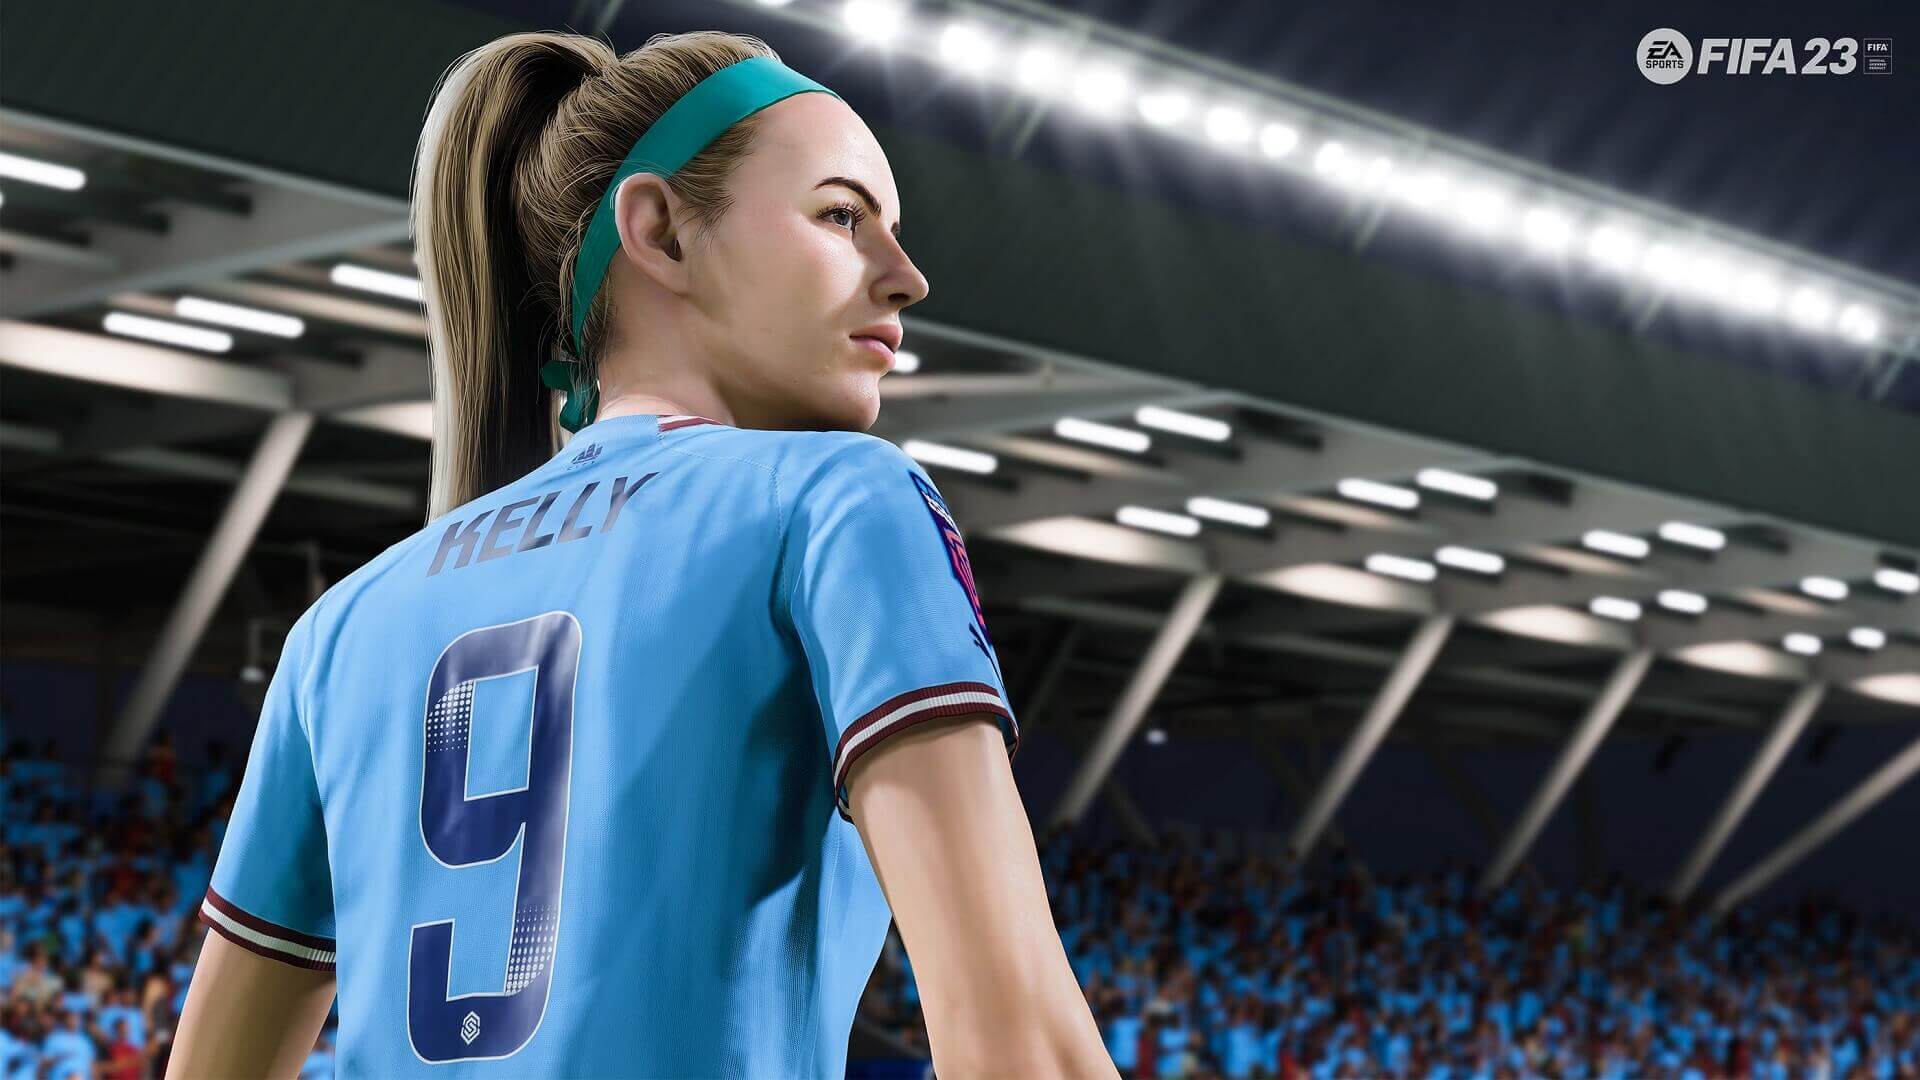 FIFA 23: Kelly, women Manchester City player